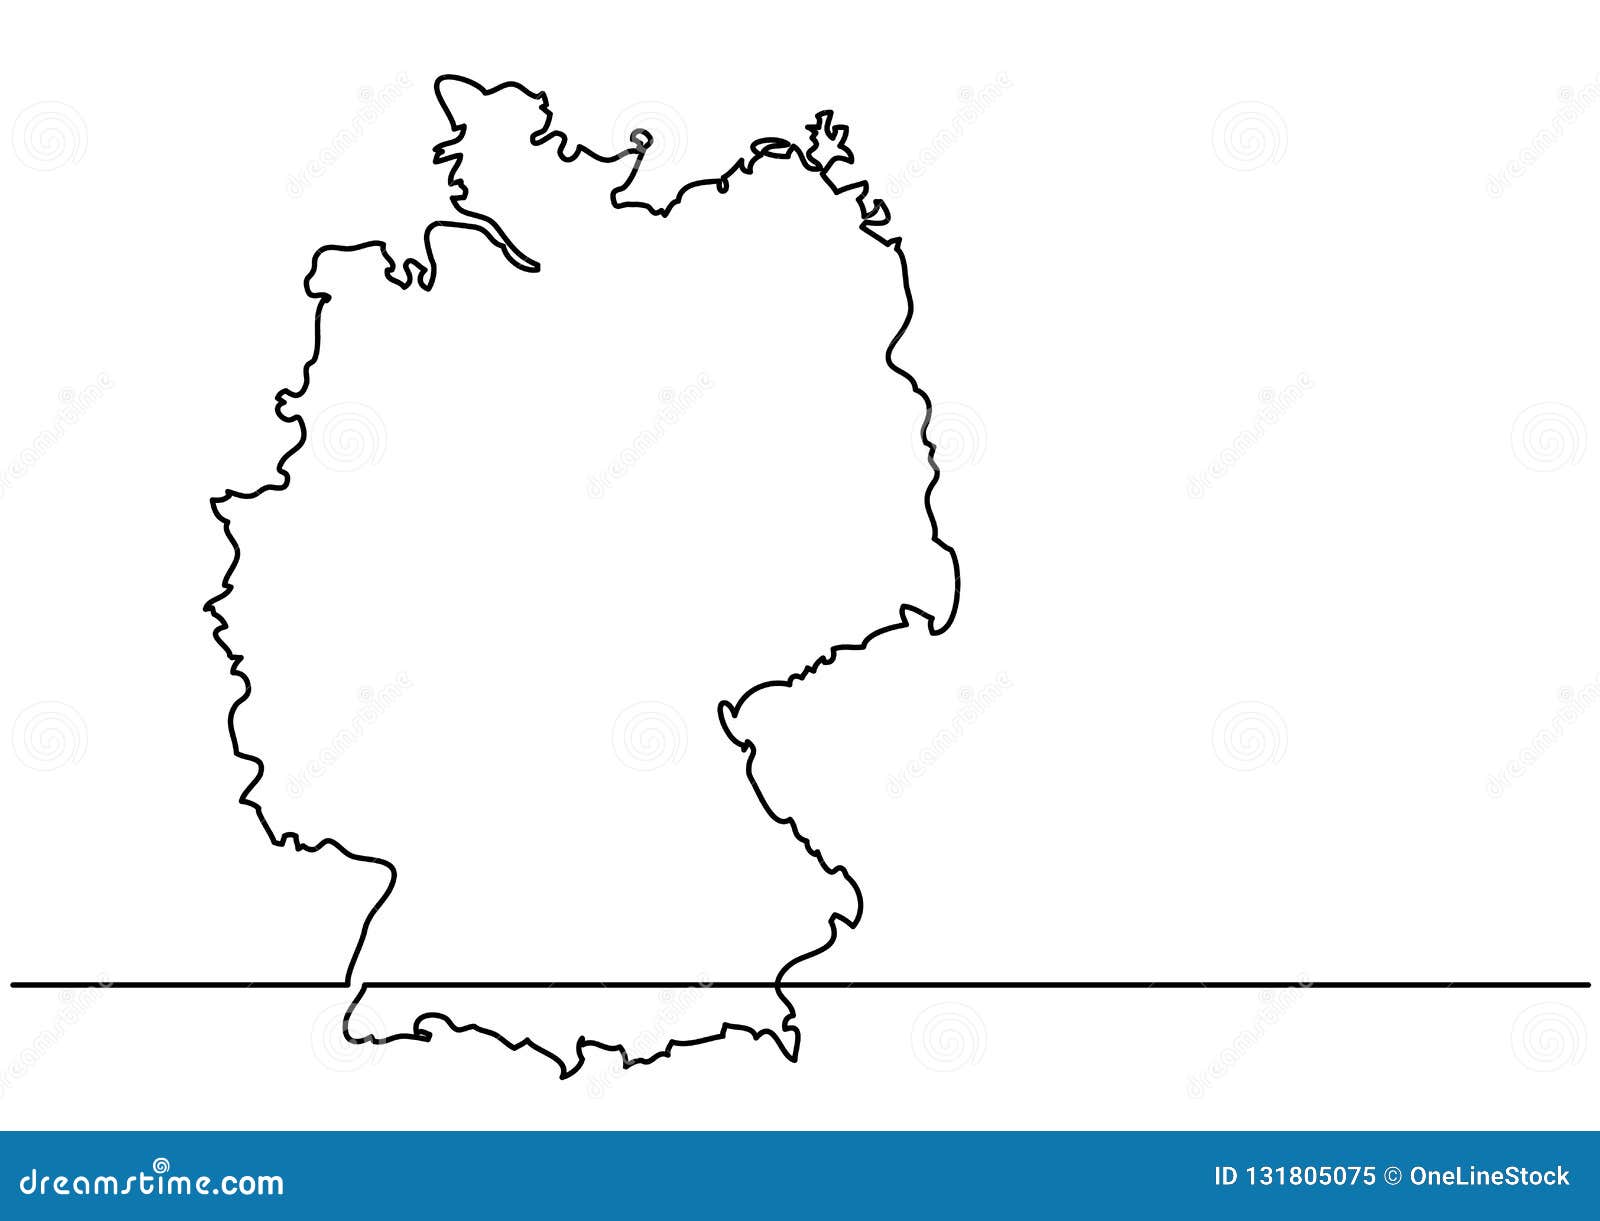 Continuous Line Drawing - Map of Germany Stock Vector - Illustration of